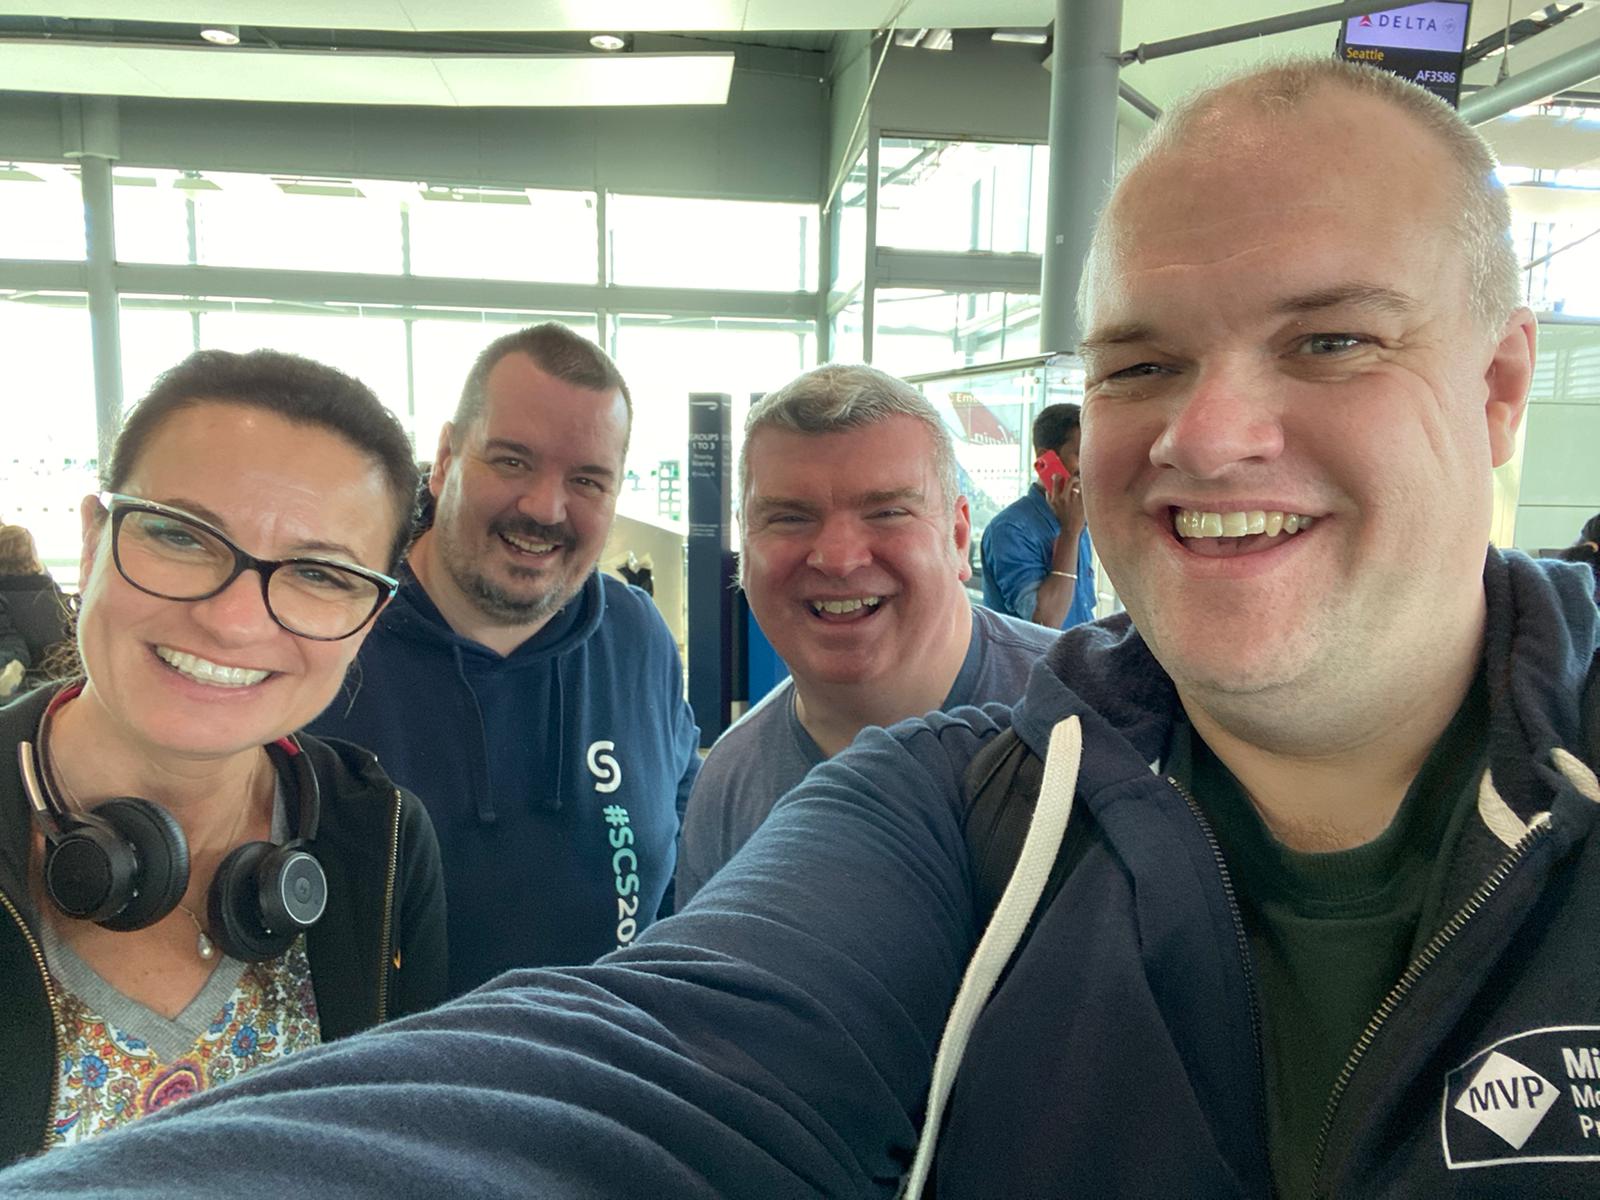 Bumping into MVPs travelling to MVP Summit